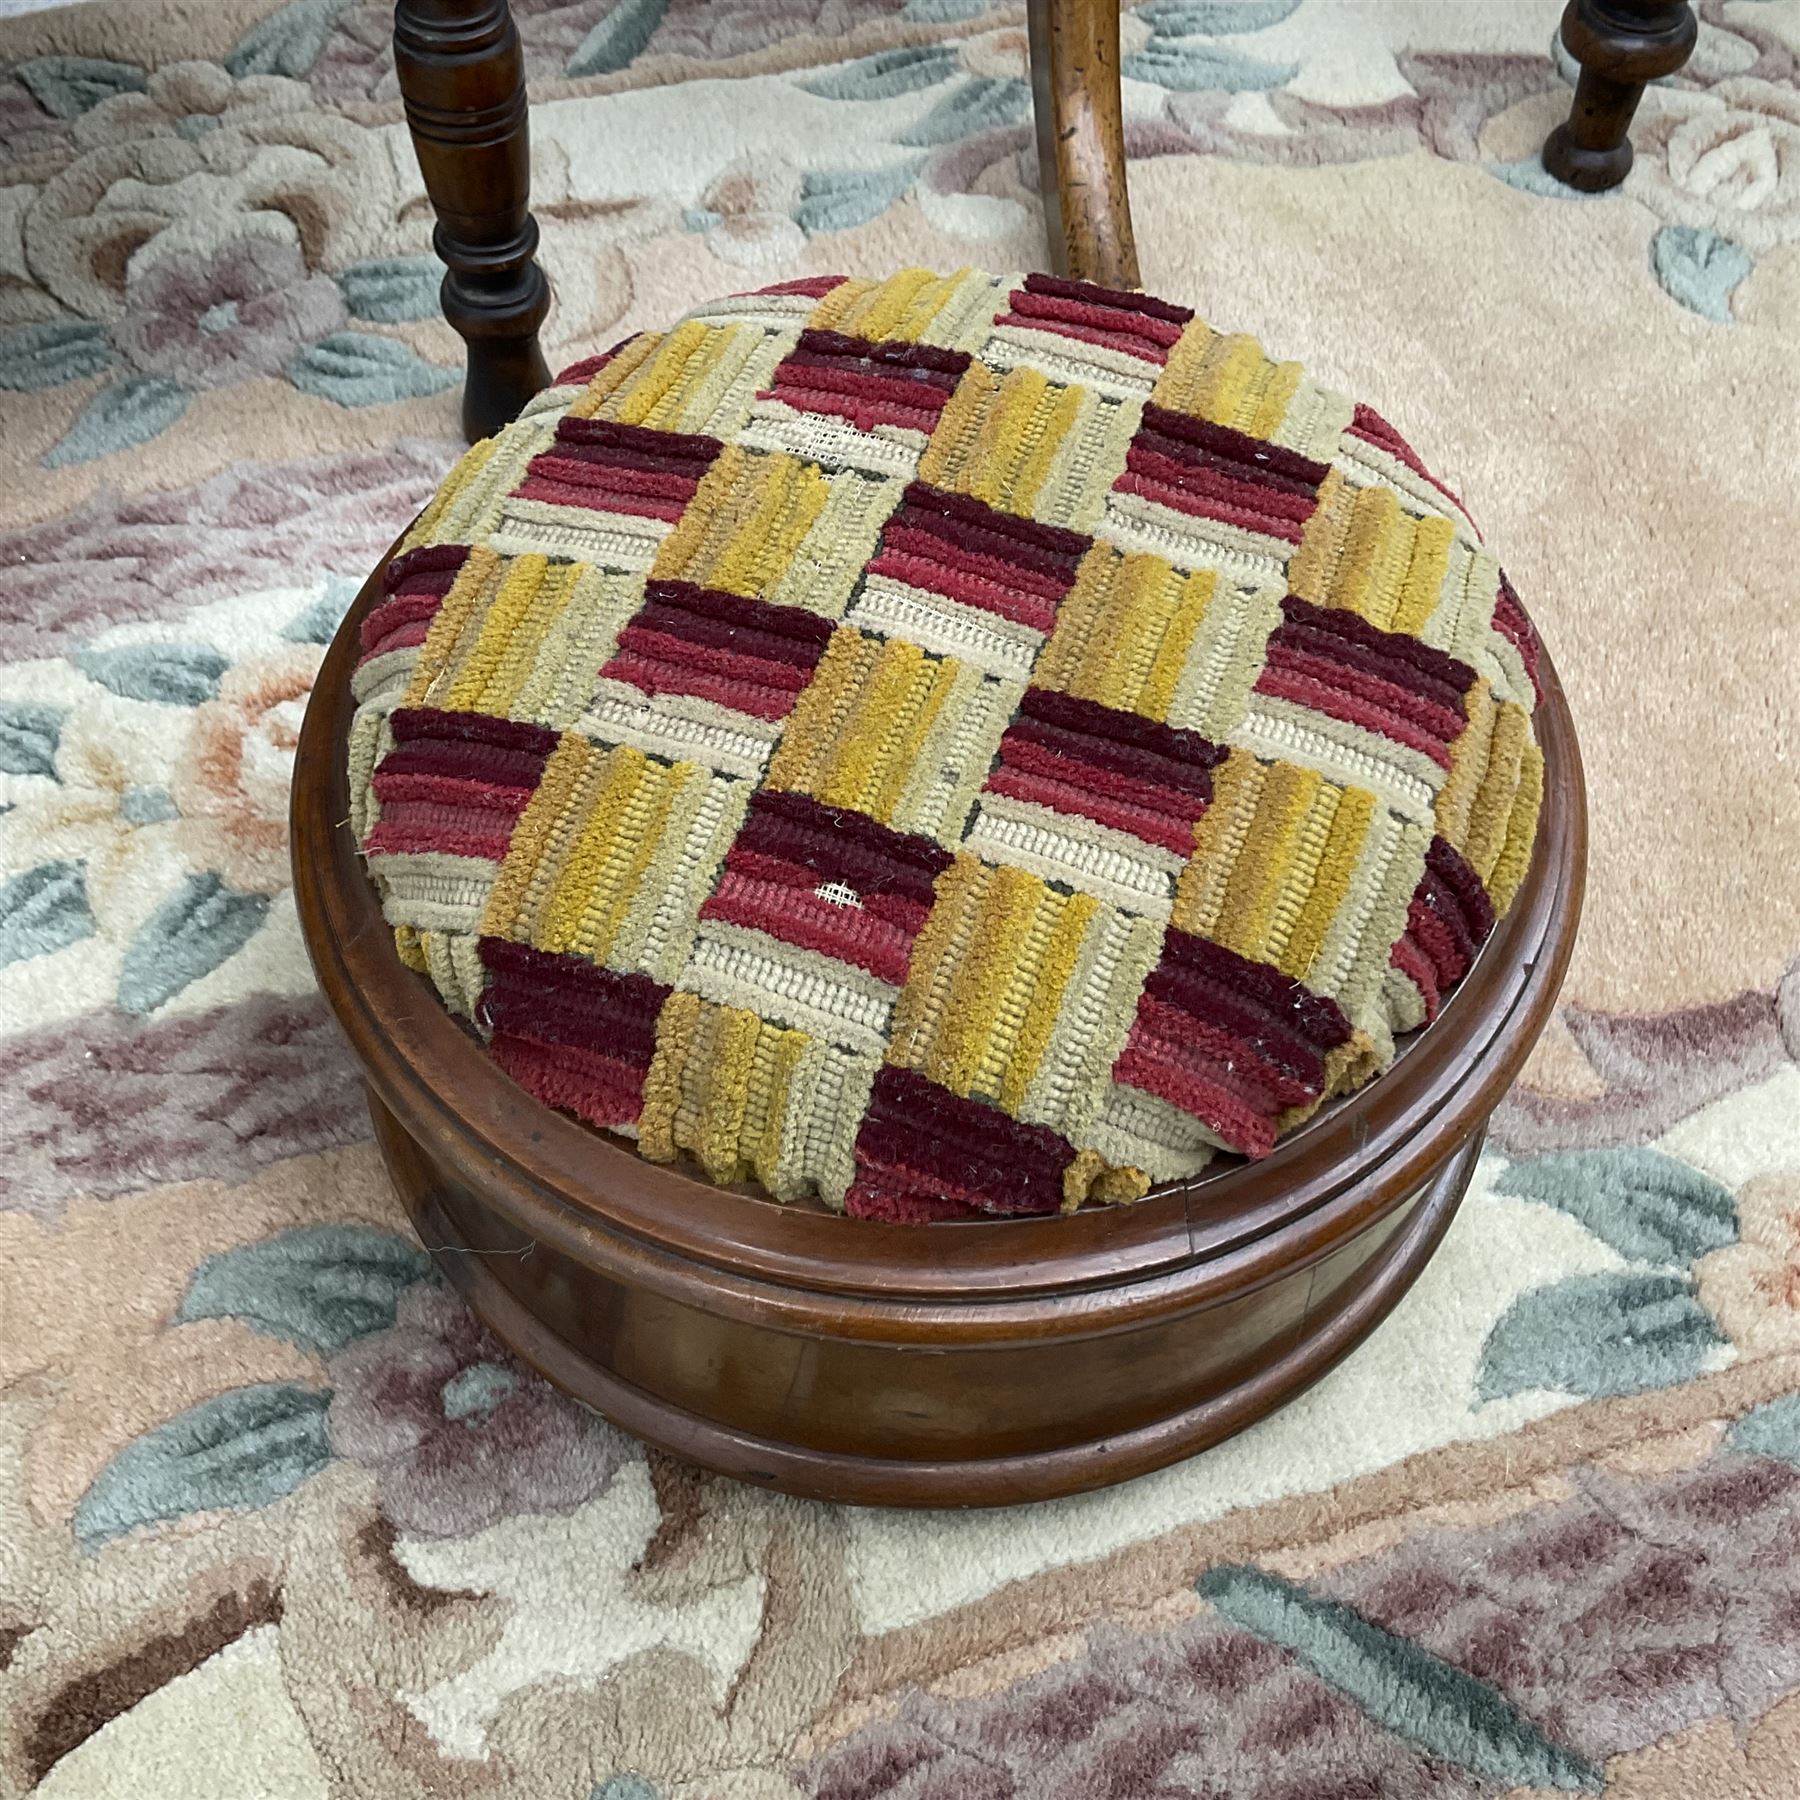 Pair of 19th century rosewood chairs with tartan upholstered drop-in seats (W46cm H88cm); 19th centu - Image 3 of 8